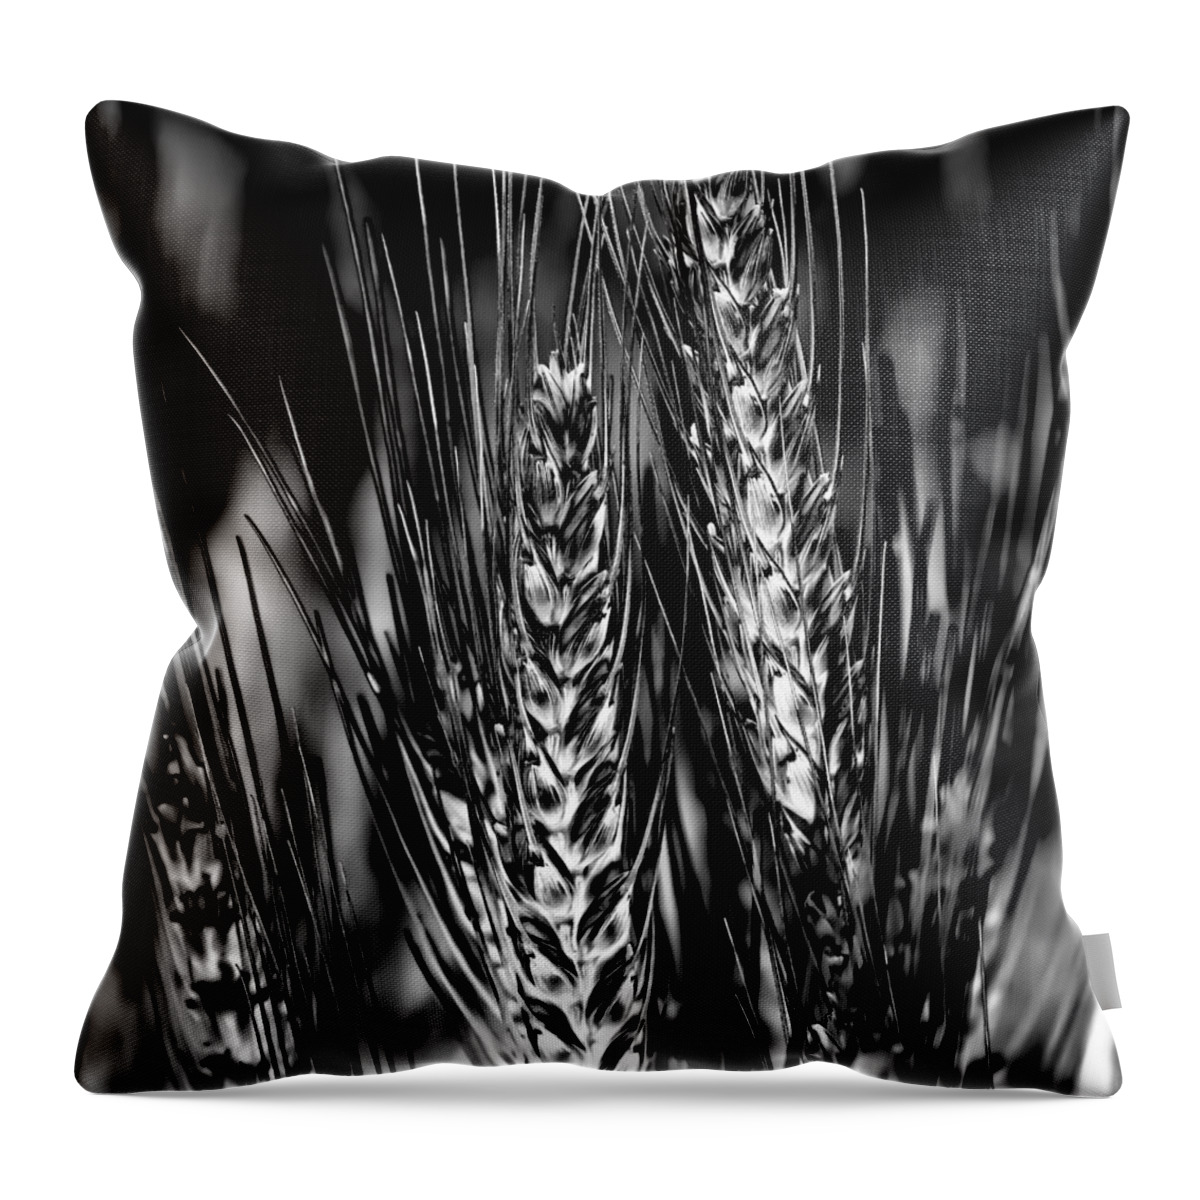 Wheat Throw Pillow featuring the photograph Palouse Wheat by David Patterson